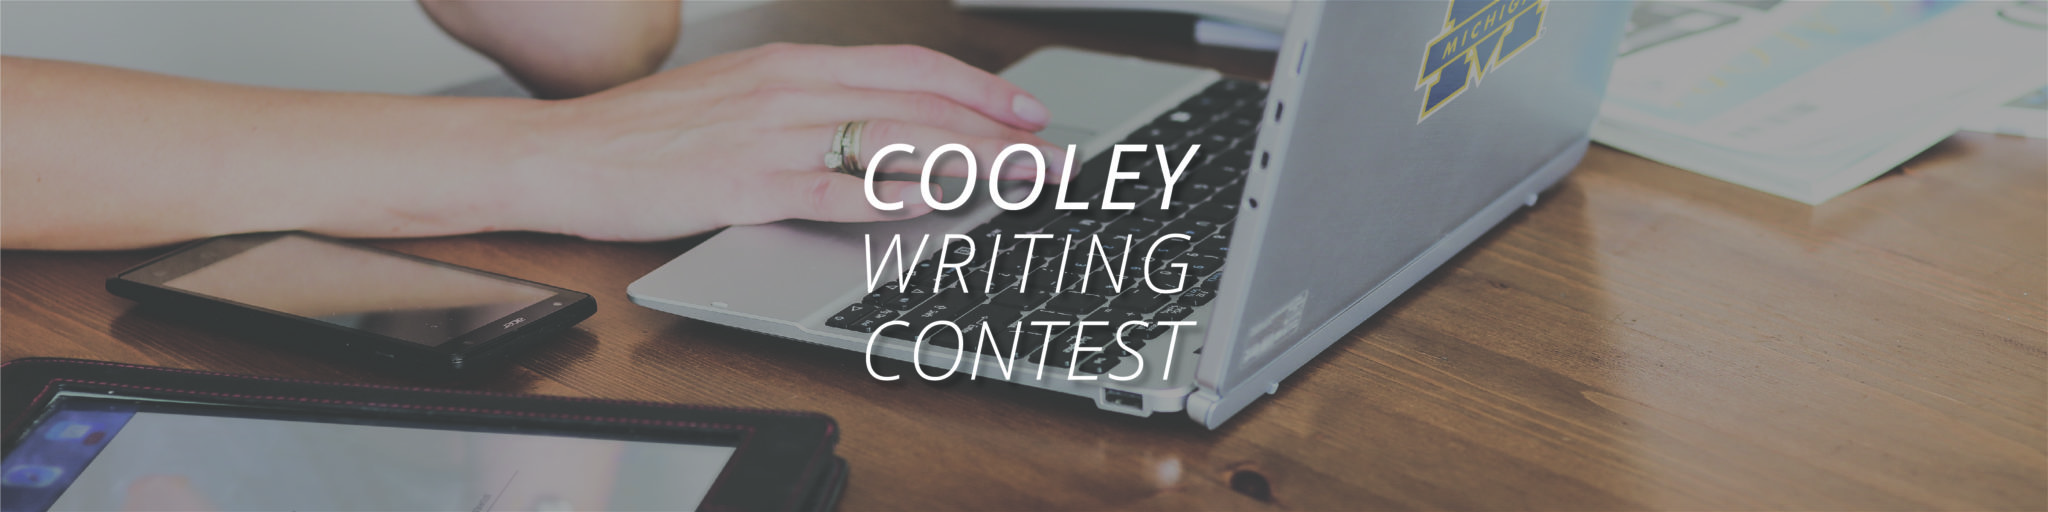 Cooley Writing Contest banner